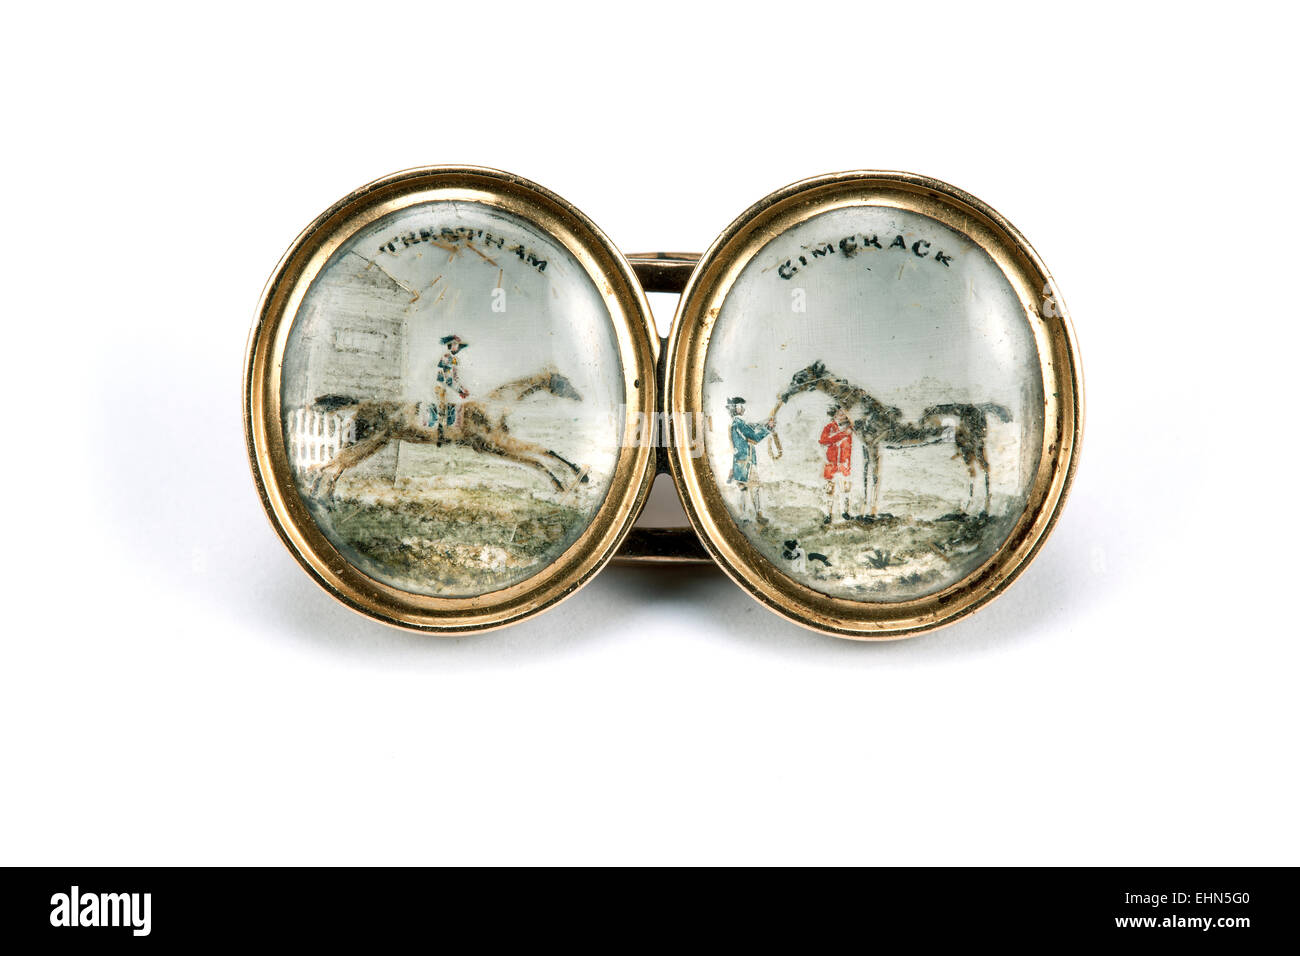 Double oval brooch depicting racehorses, originally cufflinks. Stock Photo